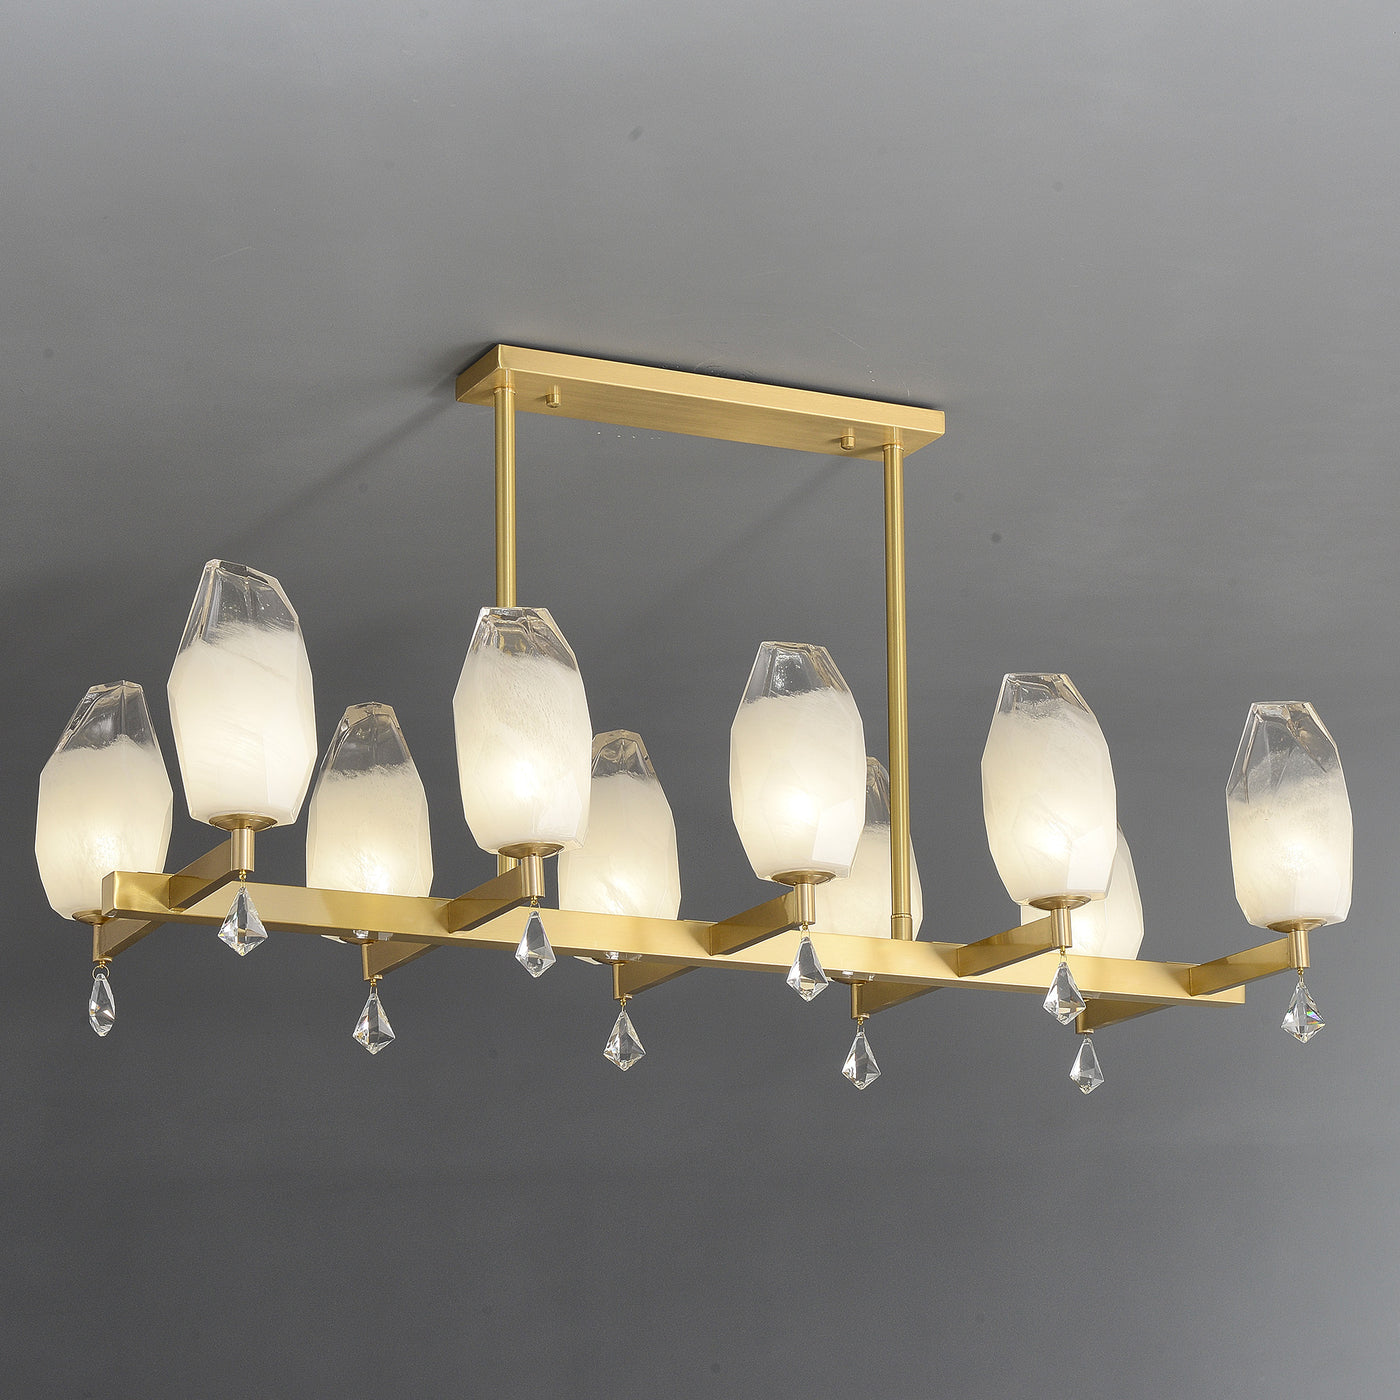 10 Lights Lily pendant glass chandelier